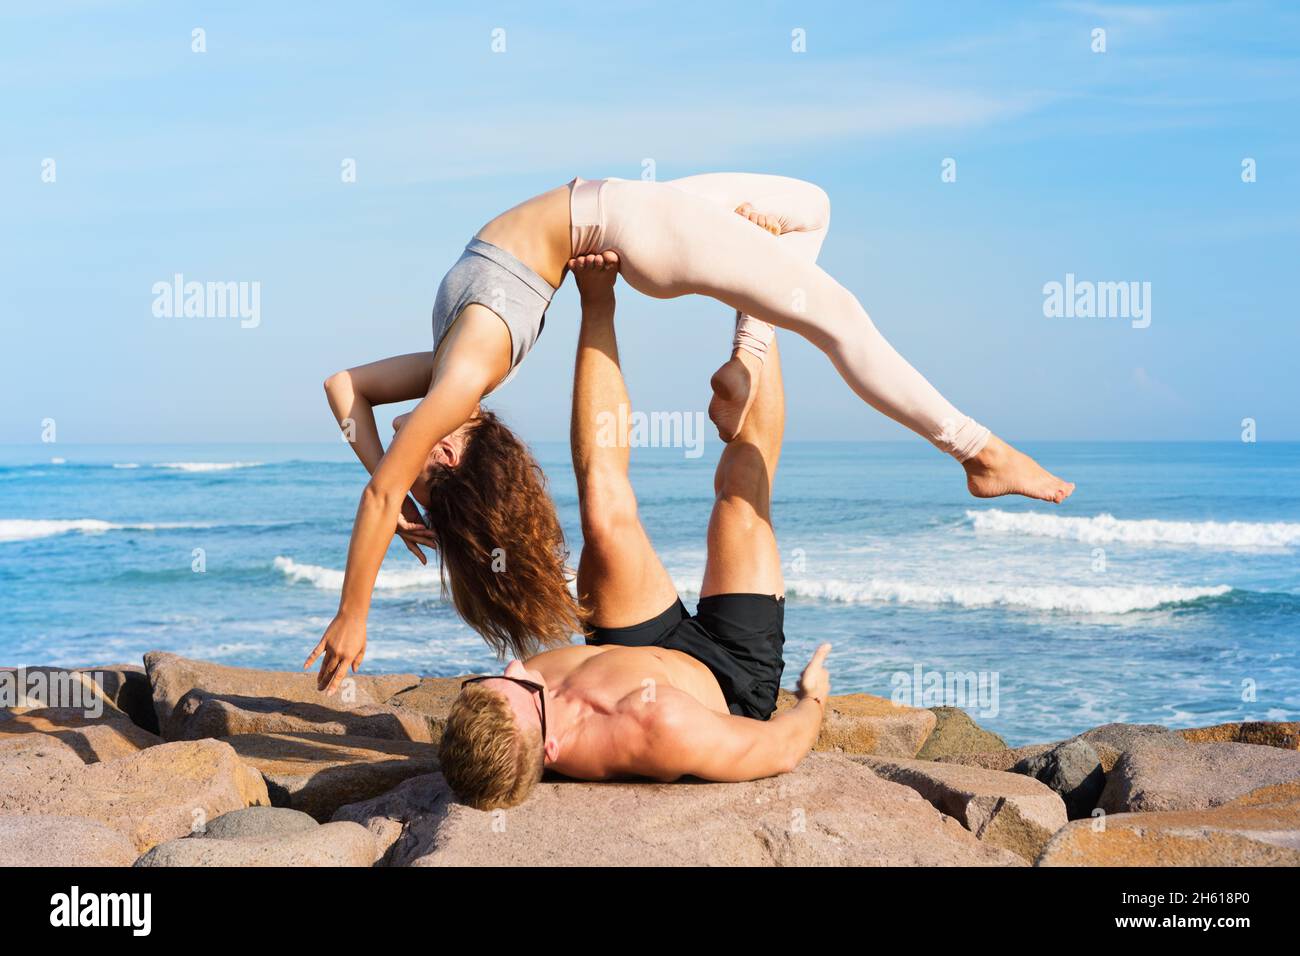 Fit young couple doing acro yoga at spa retreat on sea beach. Active woman balancing on partner feet, stretching at acroyoga pose. Healthy lifestyle. Stock Photo